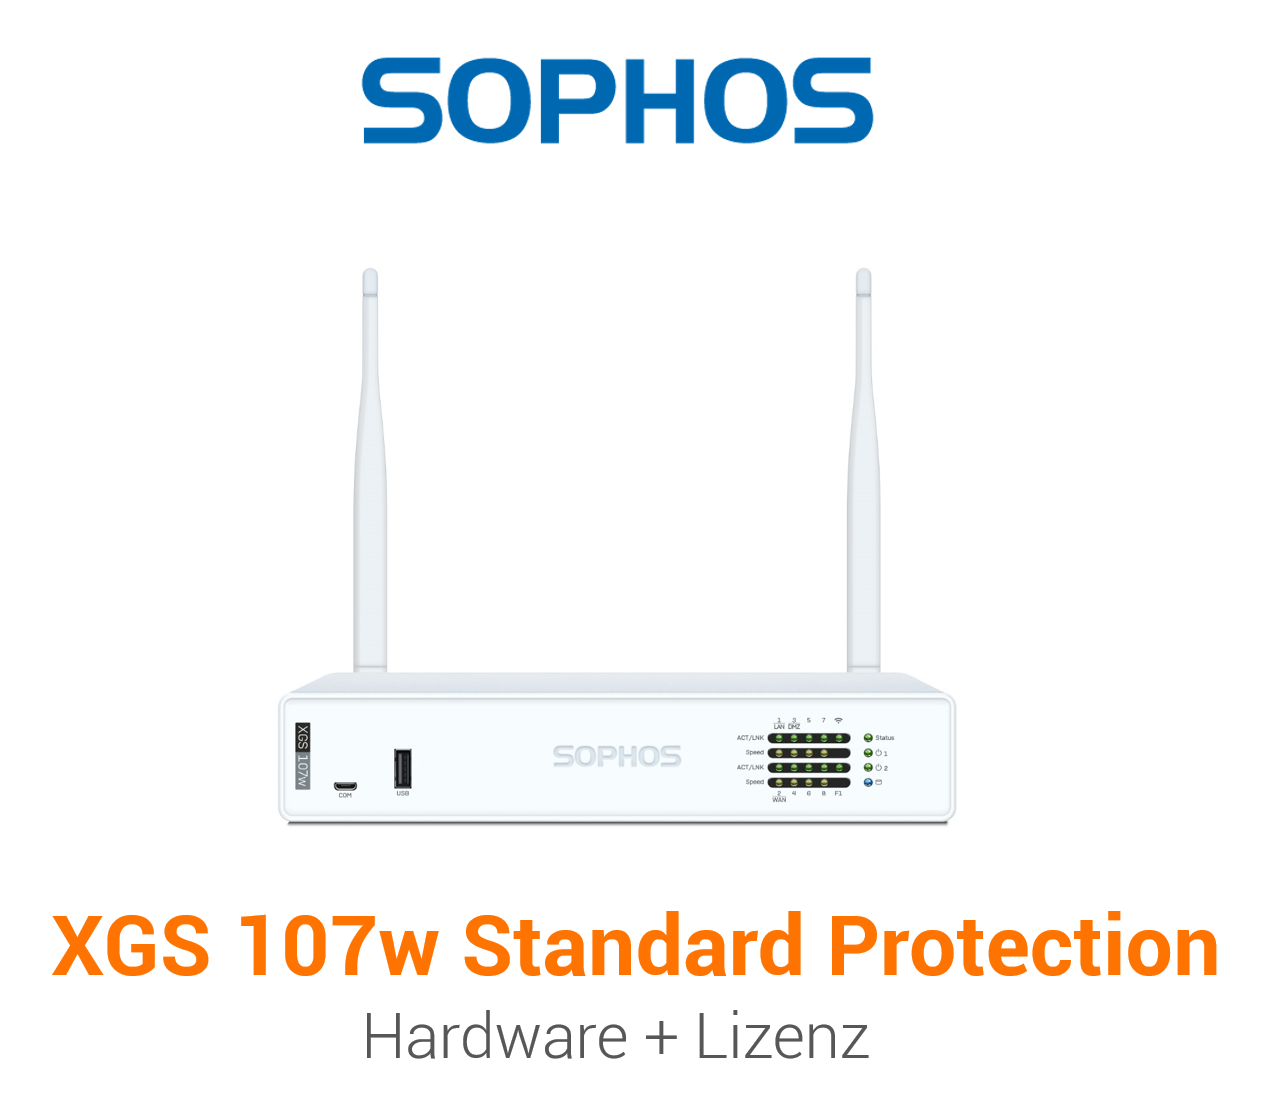 Sophos XGS 107w mit Standard Protection